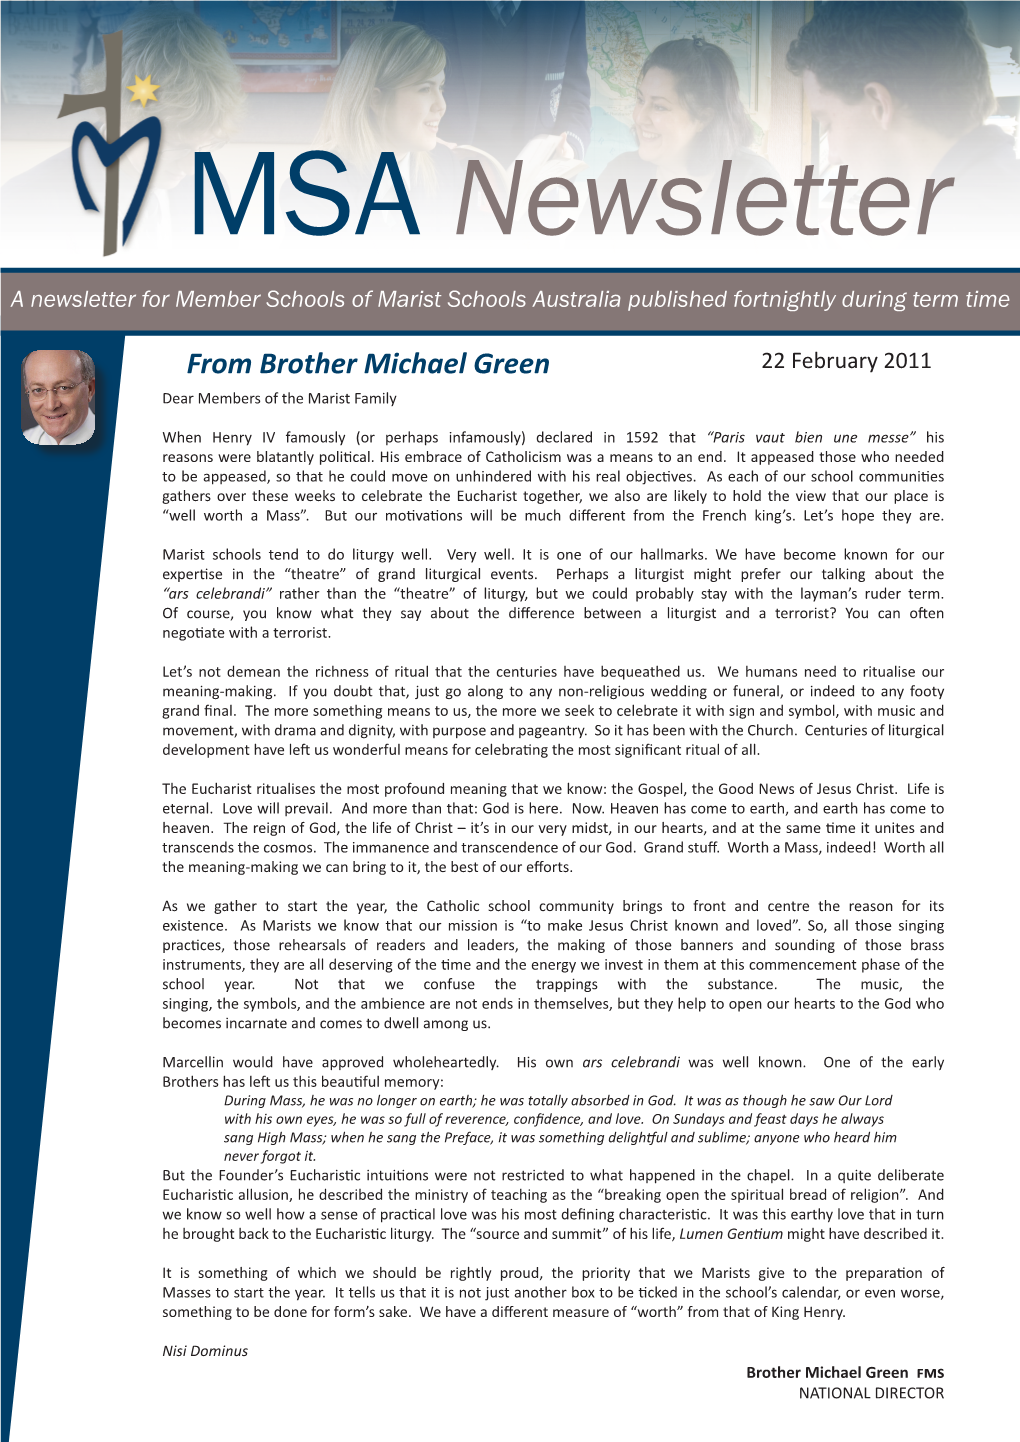 MSA Newsletter a Newsletter for Member Schools of Marist Schools Australia Published Fortnightly During Term Time